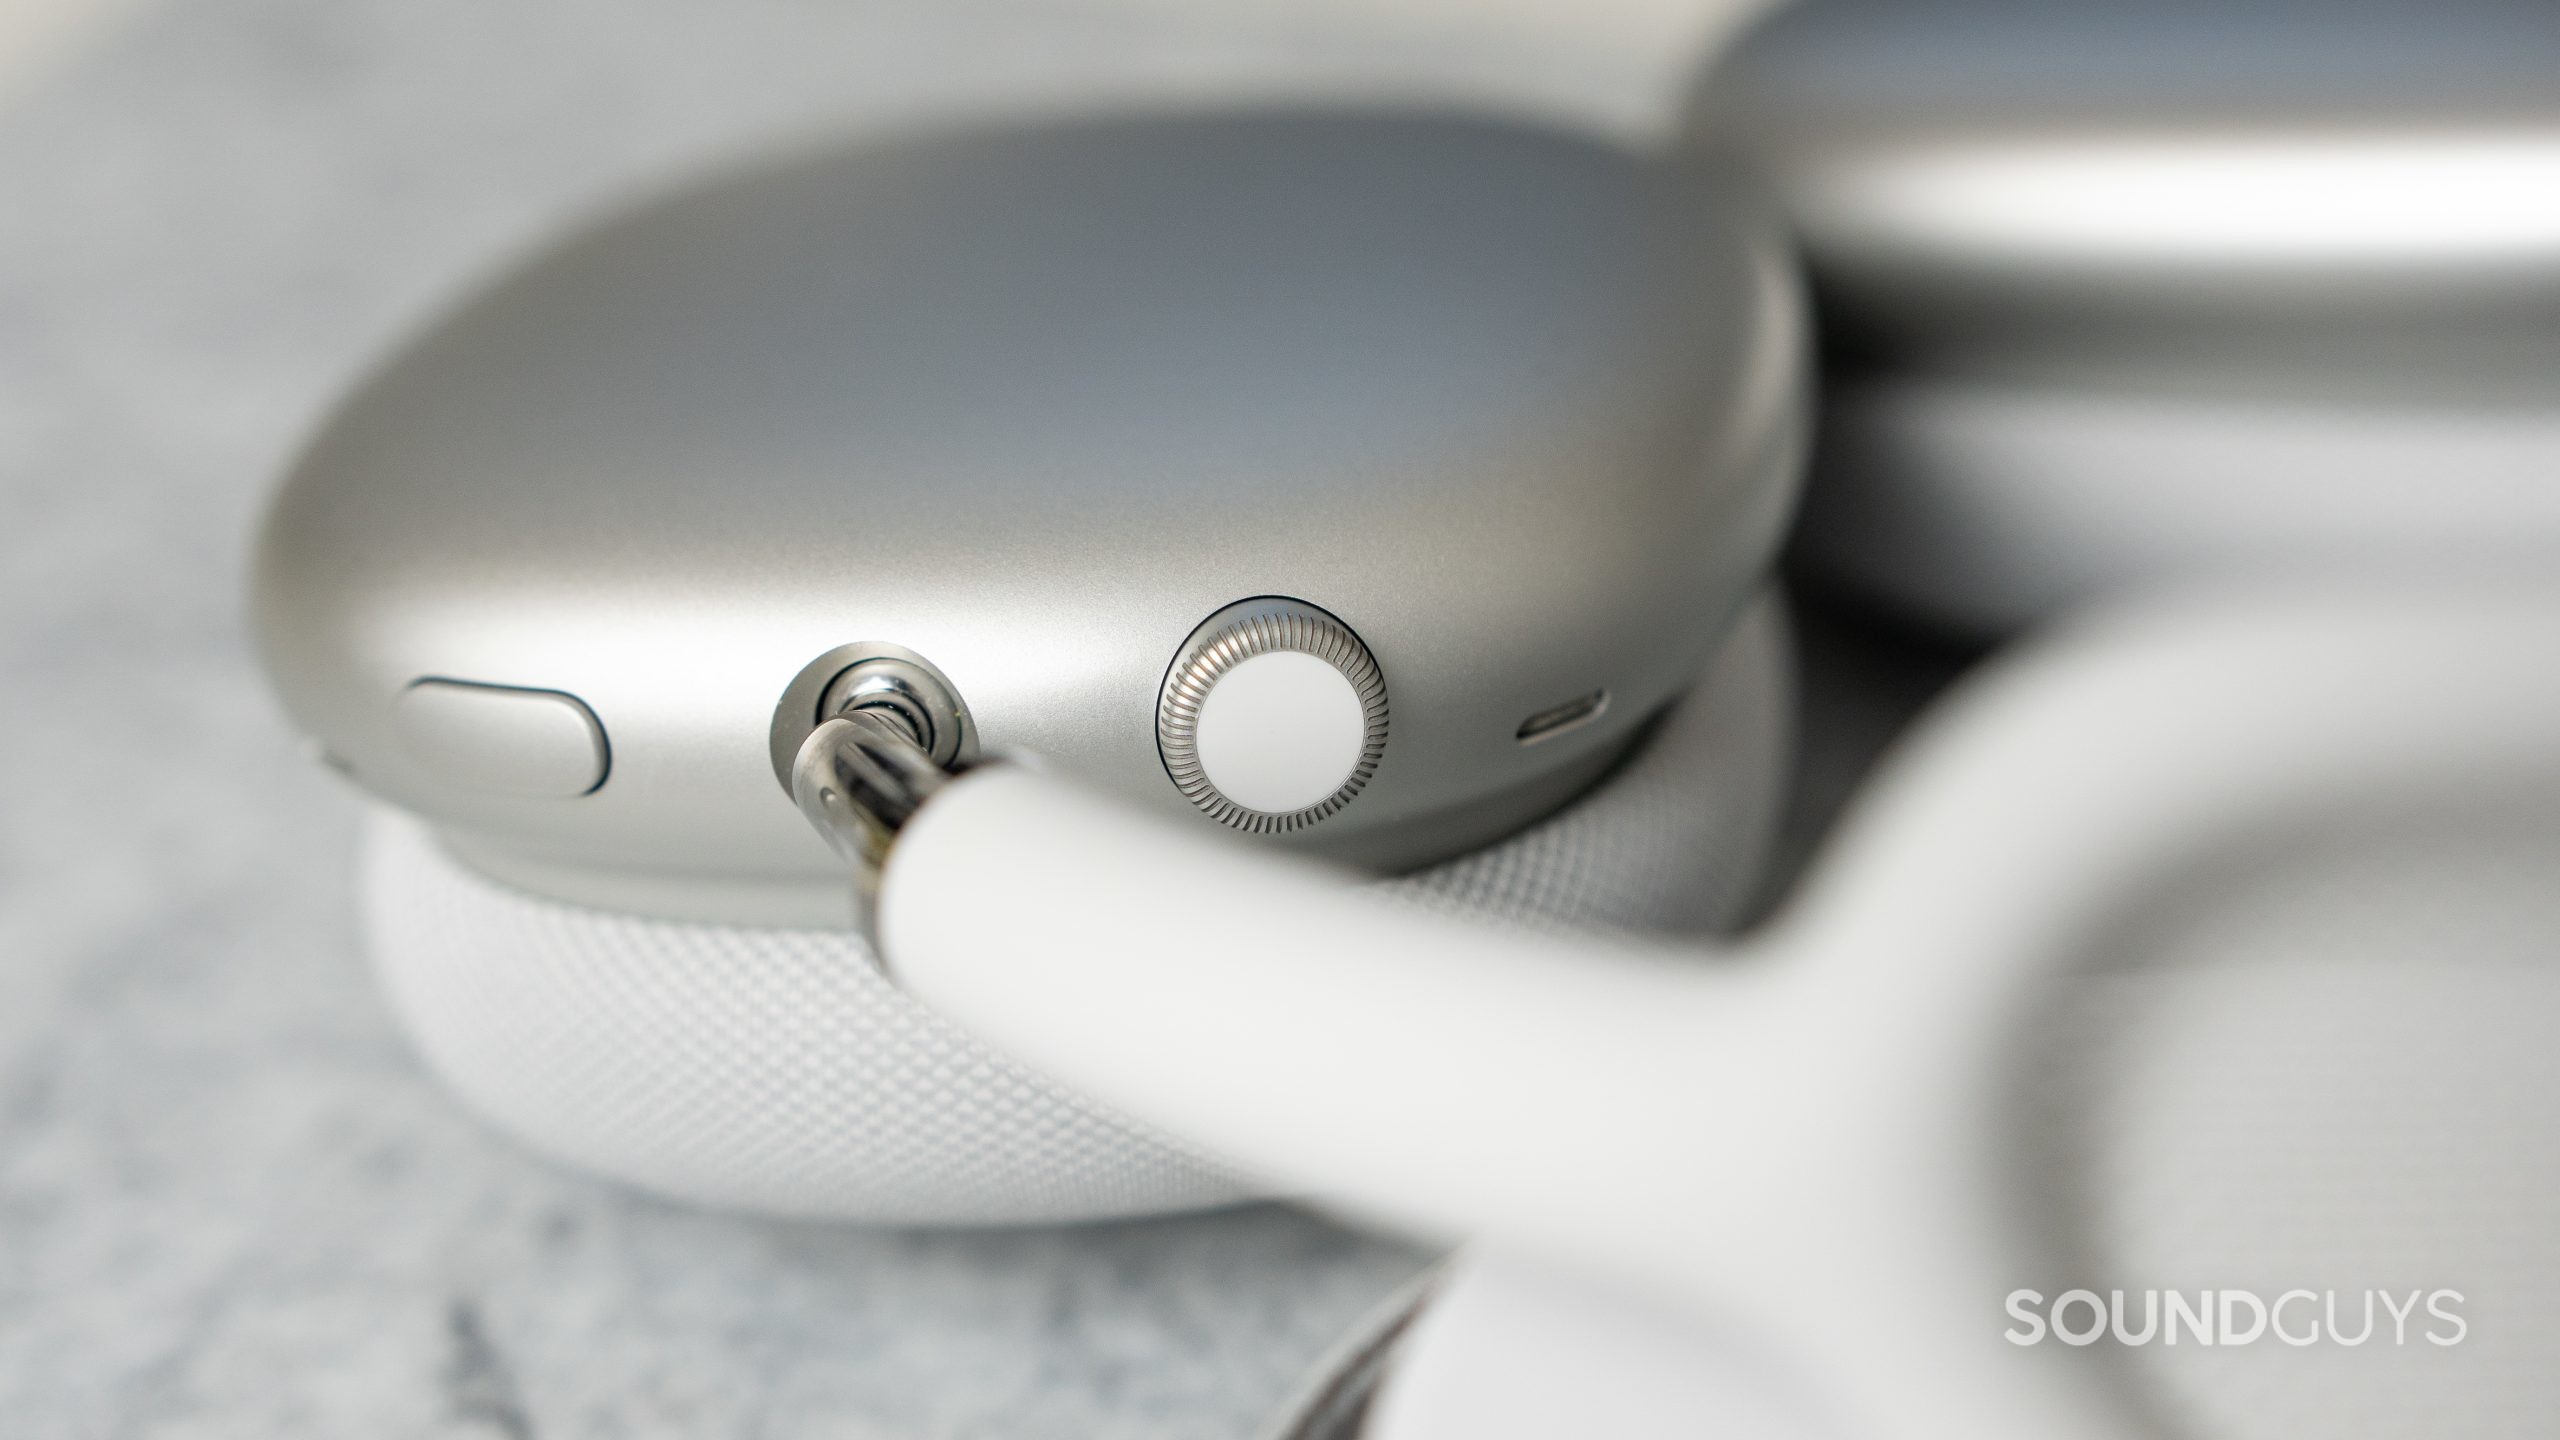 Close-up of the digital crown at the top of the Apple AirPods Max right ear cup.